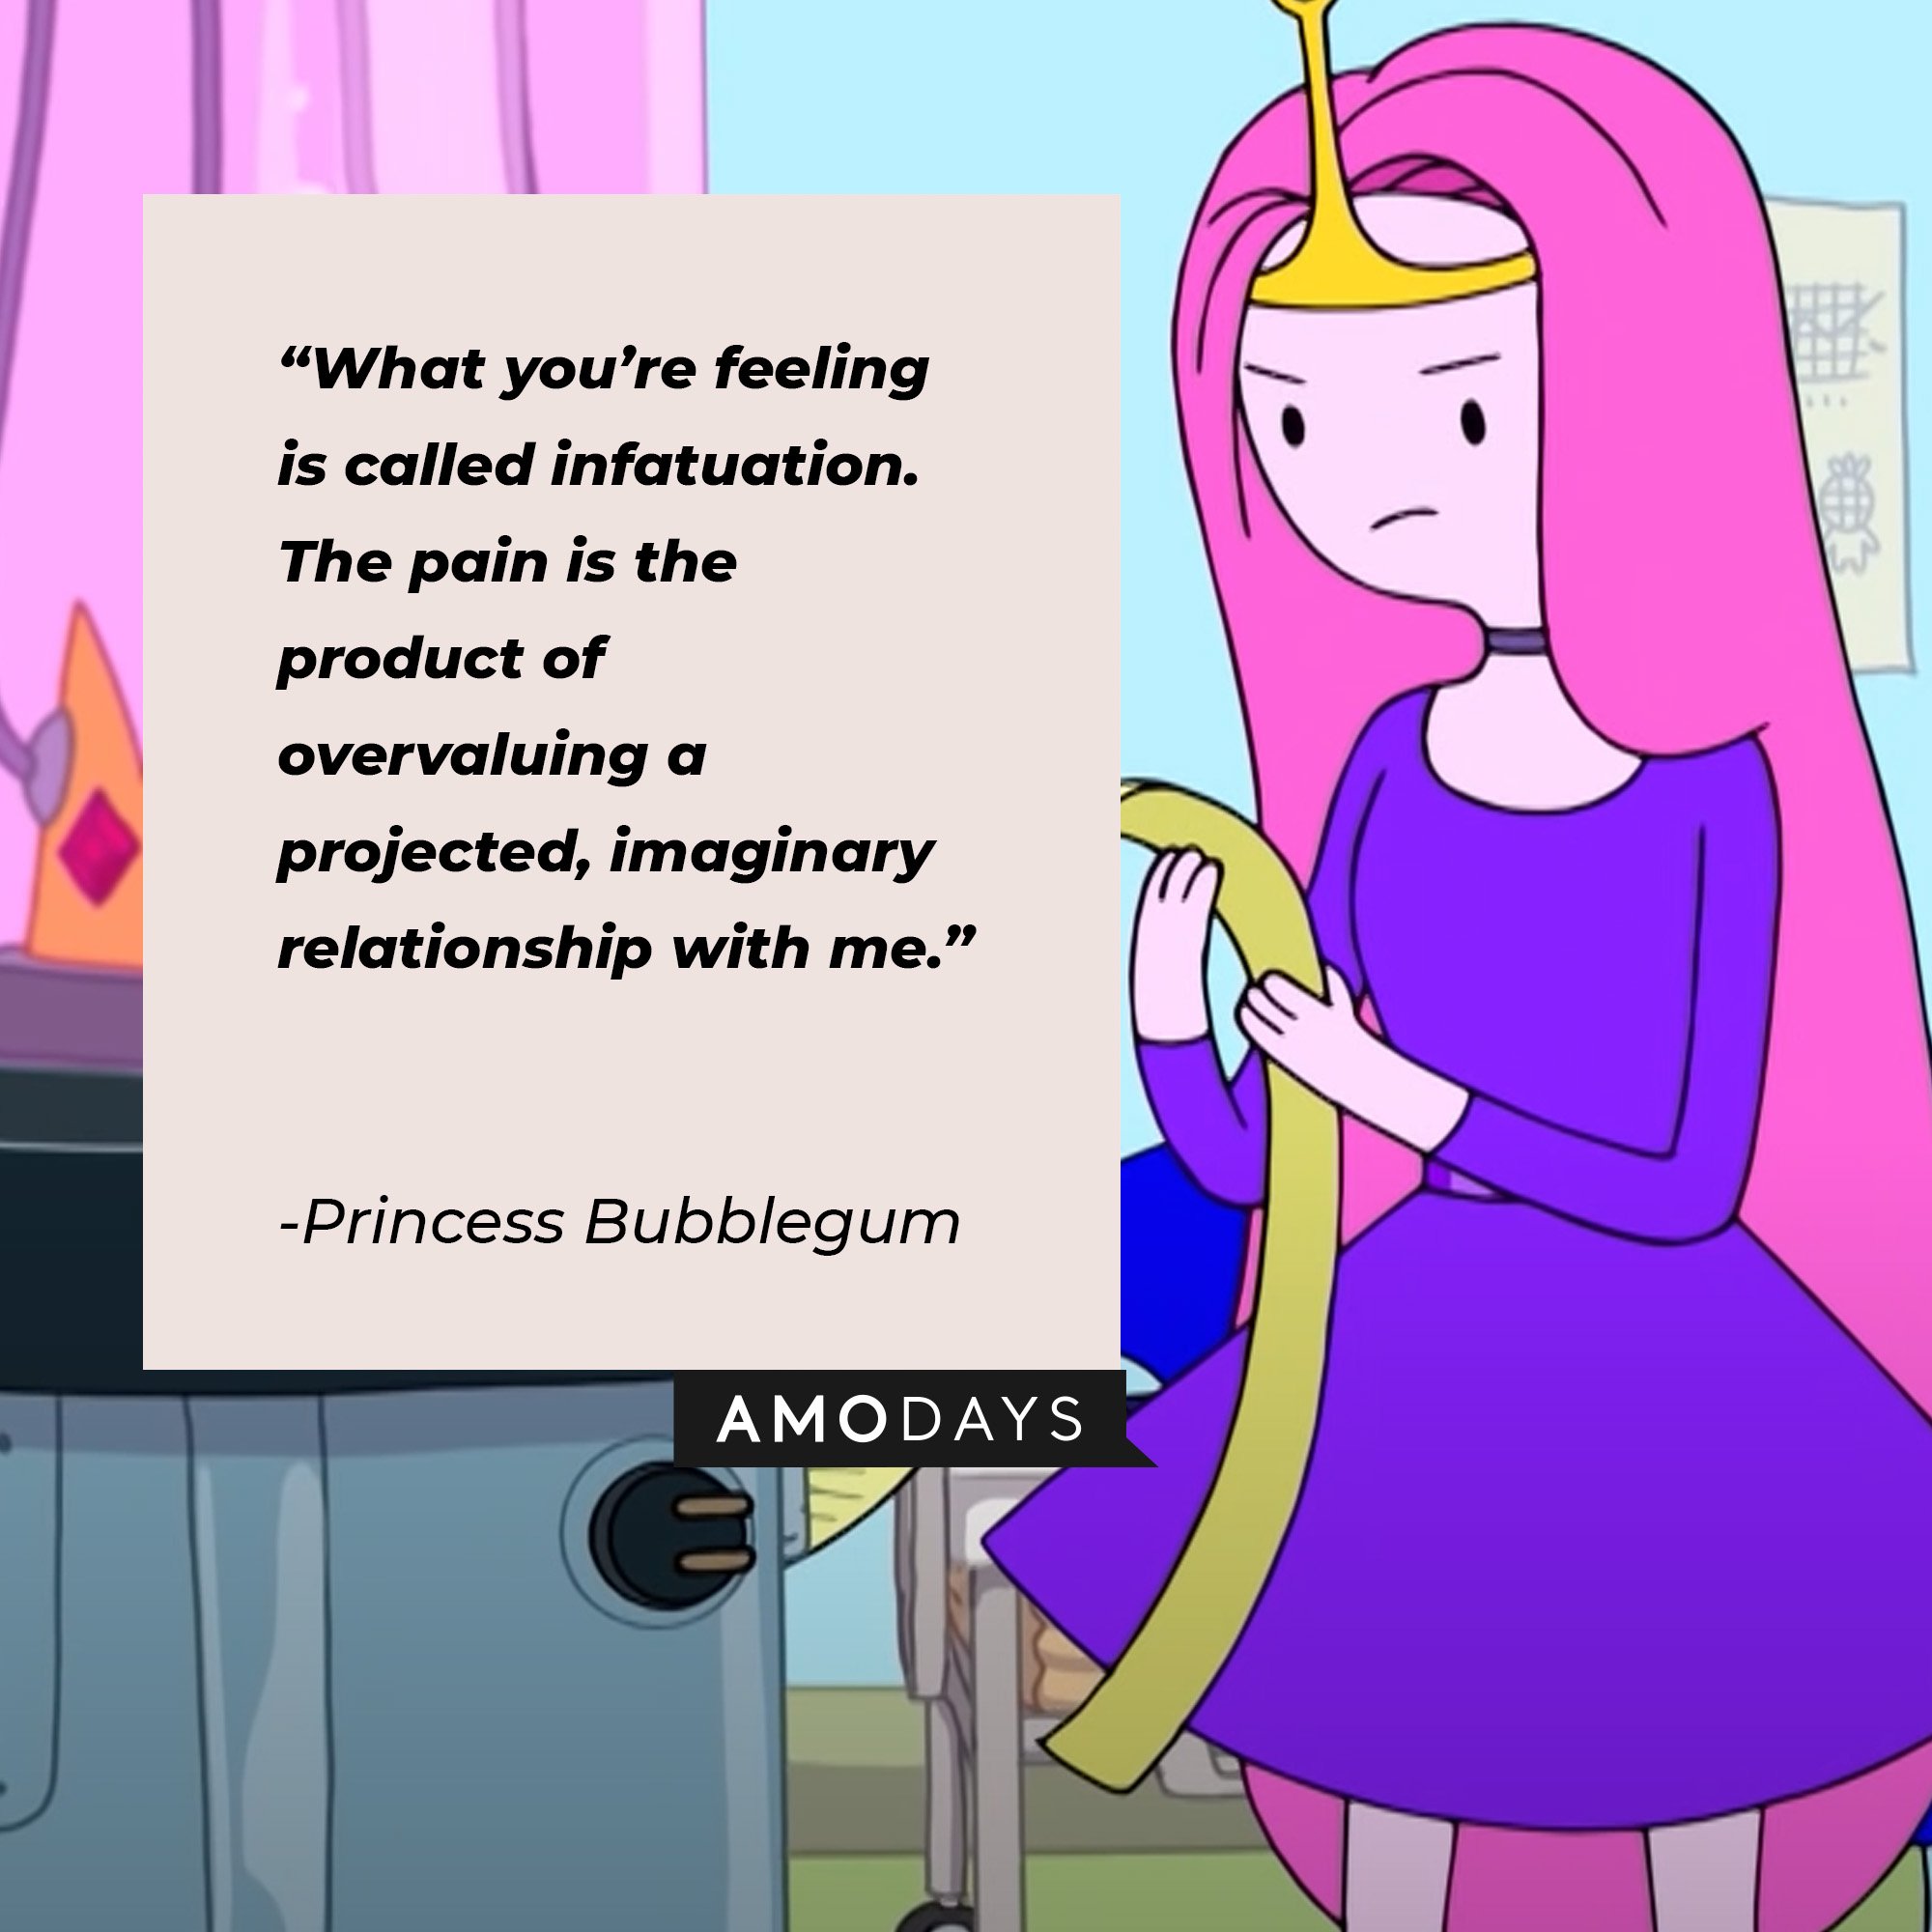 Princess Bubblegum’s quote: “What you’re feeling is called infatuation. The pain is the product of overvaluing a projected, imaginary relationship with me.” | Image: AmoDays